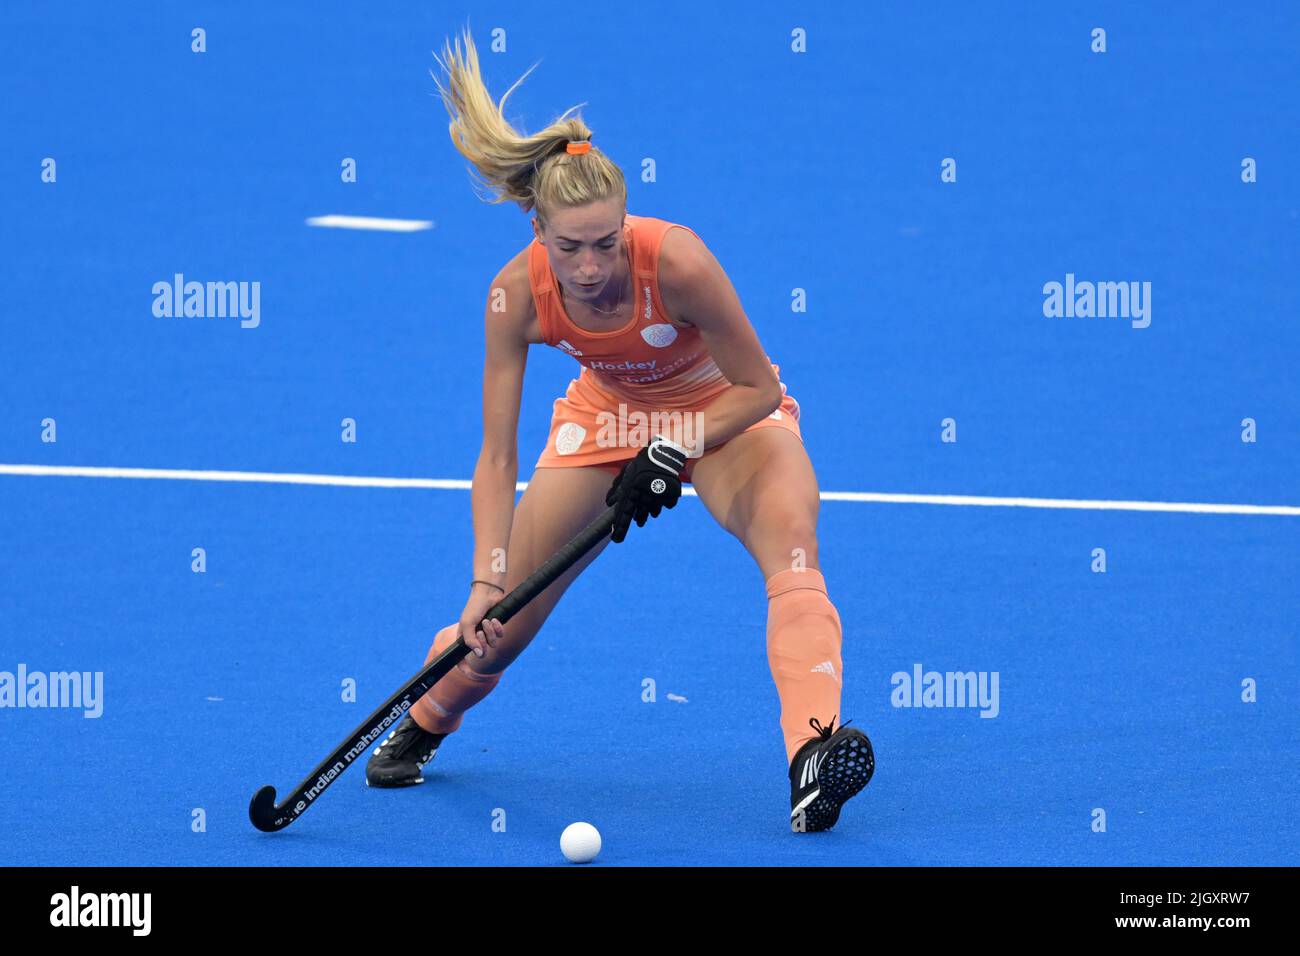 AMSTERDAM -Sanne Koolen of Holland hockey women during the match between  the Netherlands and Belgium at the World Hockey Championships at the  Wagener stadium, on July 12, 2022 in Amsterdam. ANP